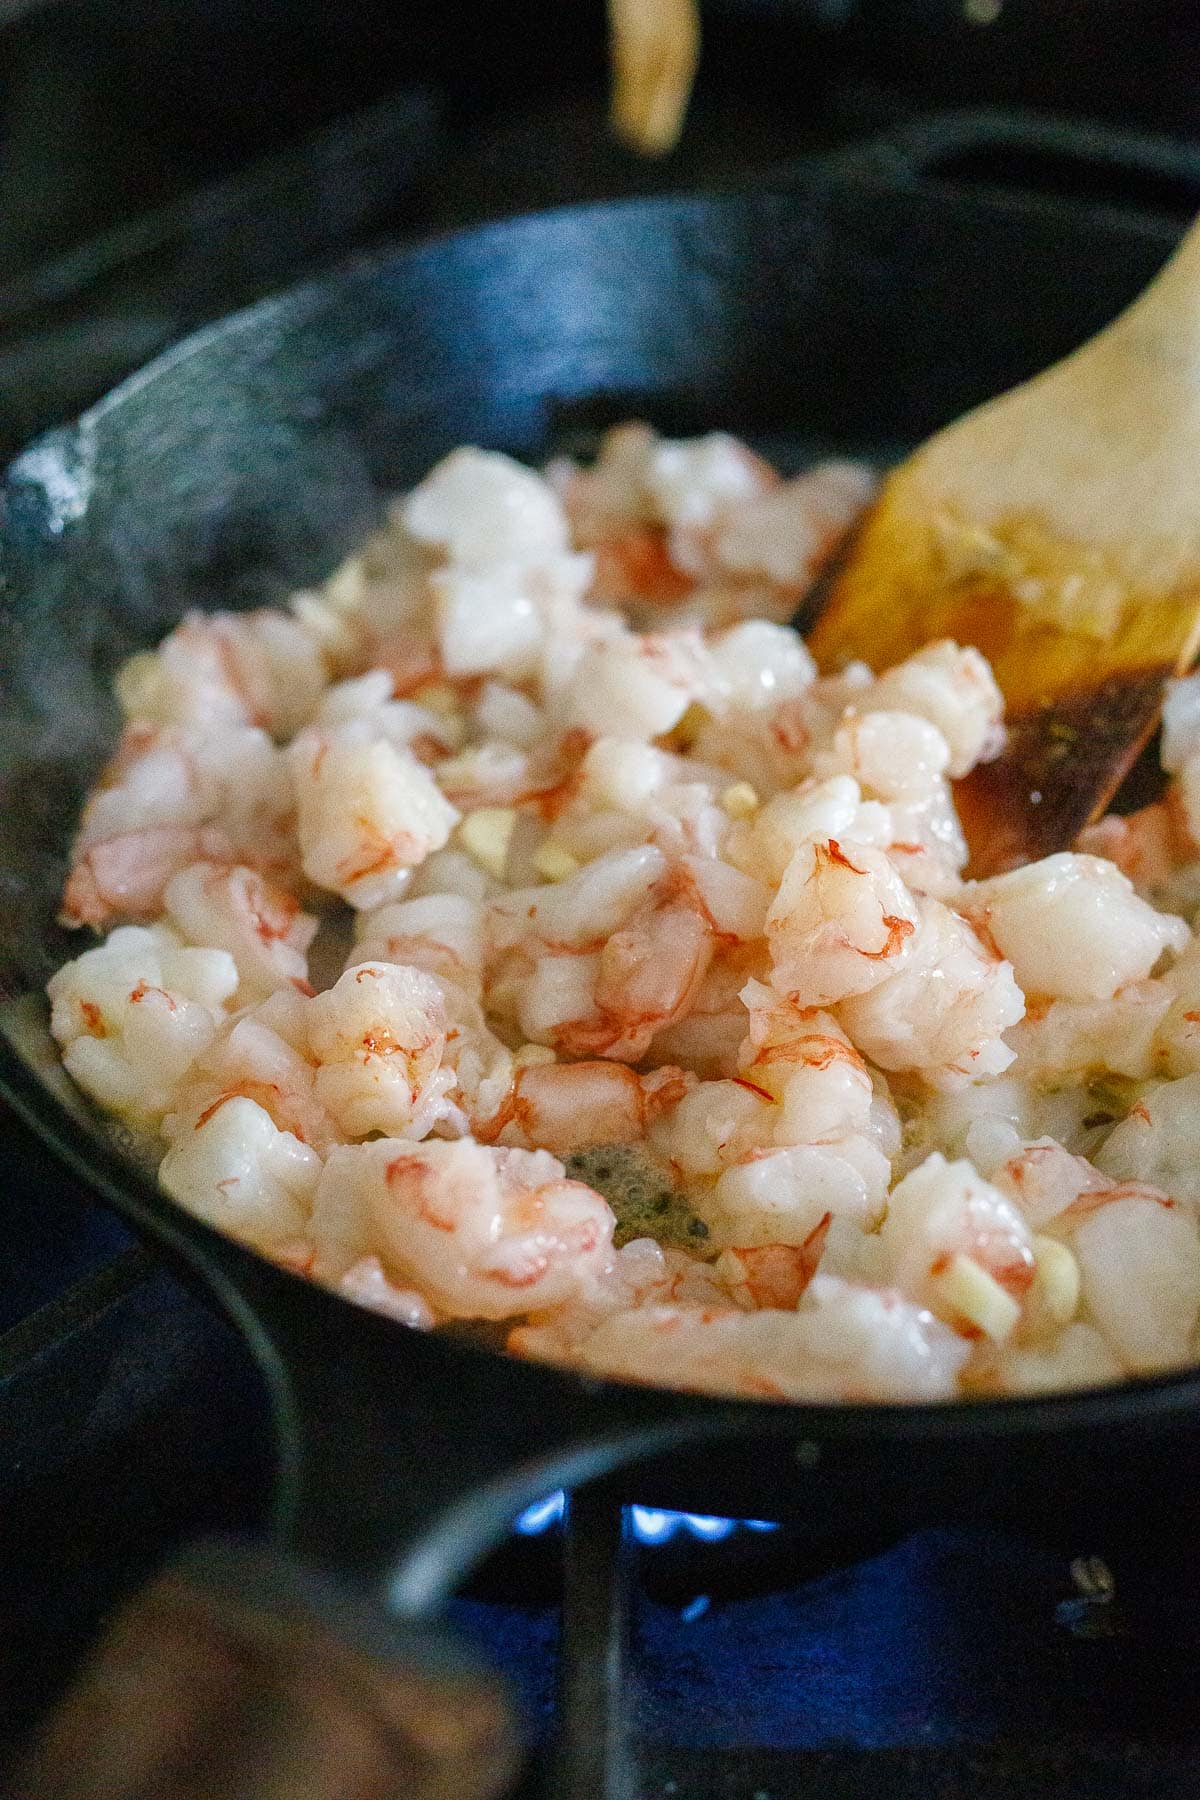 Sauteing the shrimp with garlic butter.